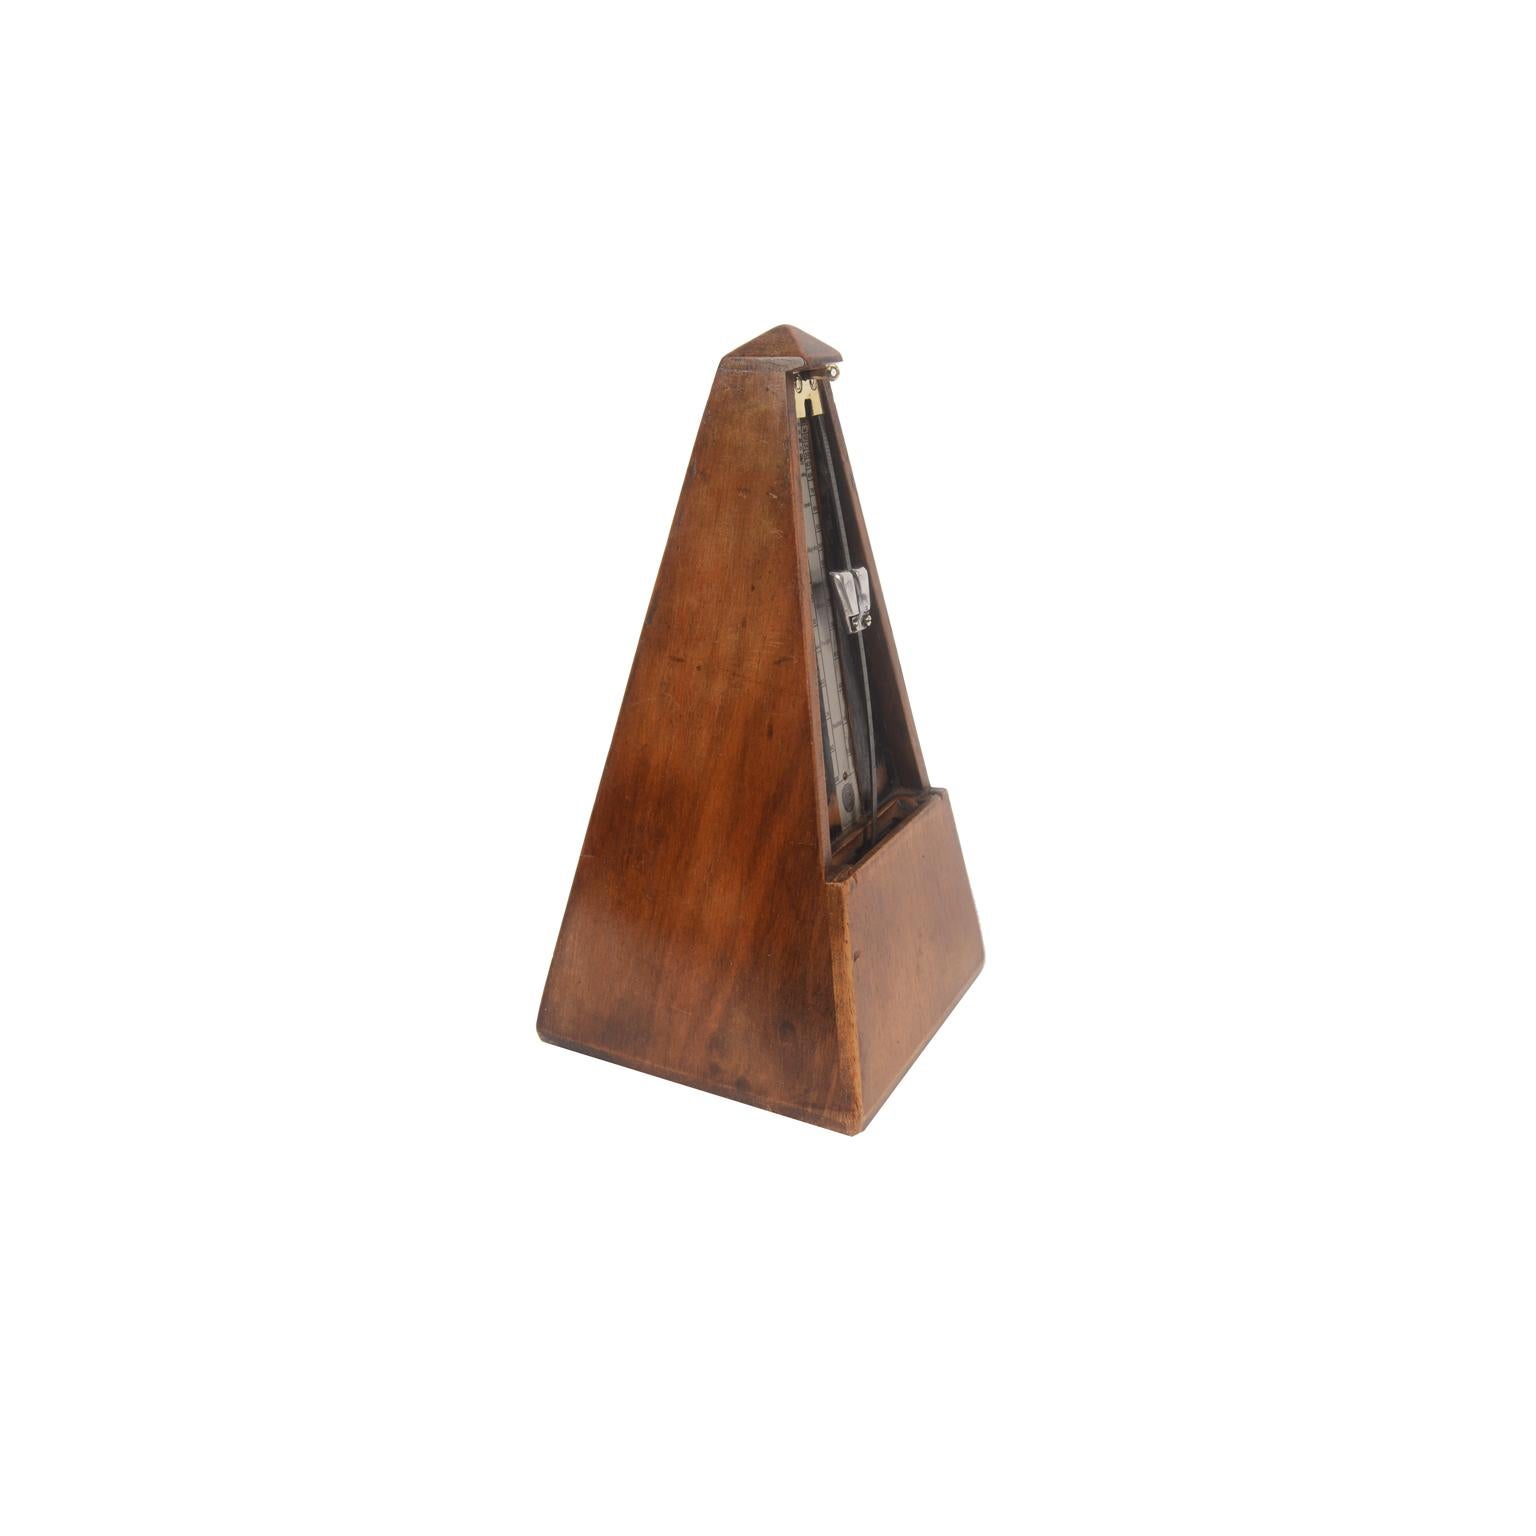 Metronome system Paquet 1815 and Johan Maelzel 1846 from the second half of the 19th century. The instrument is placed in a pyramid-shaped box of oakwood which on the front has a brass plate and the names of Paquet 1815 and of the inventor, the